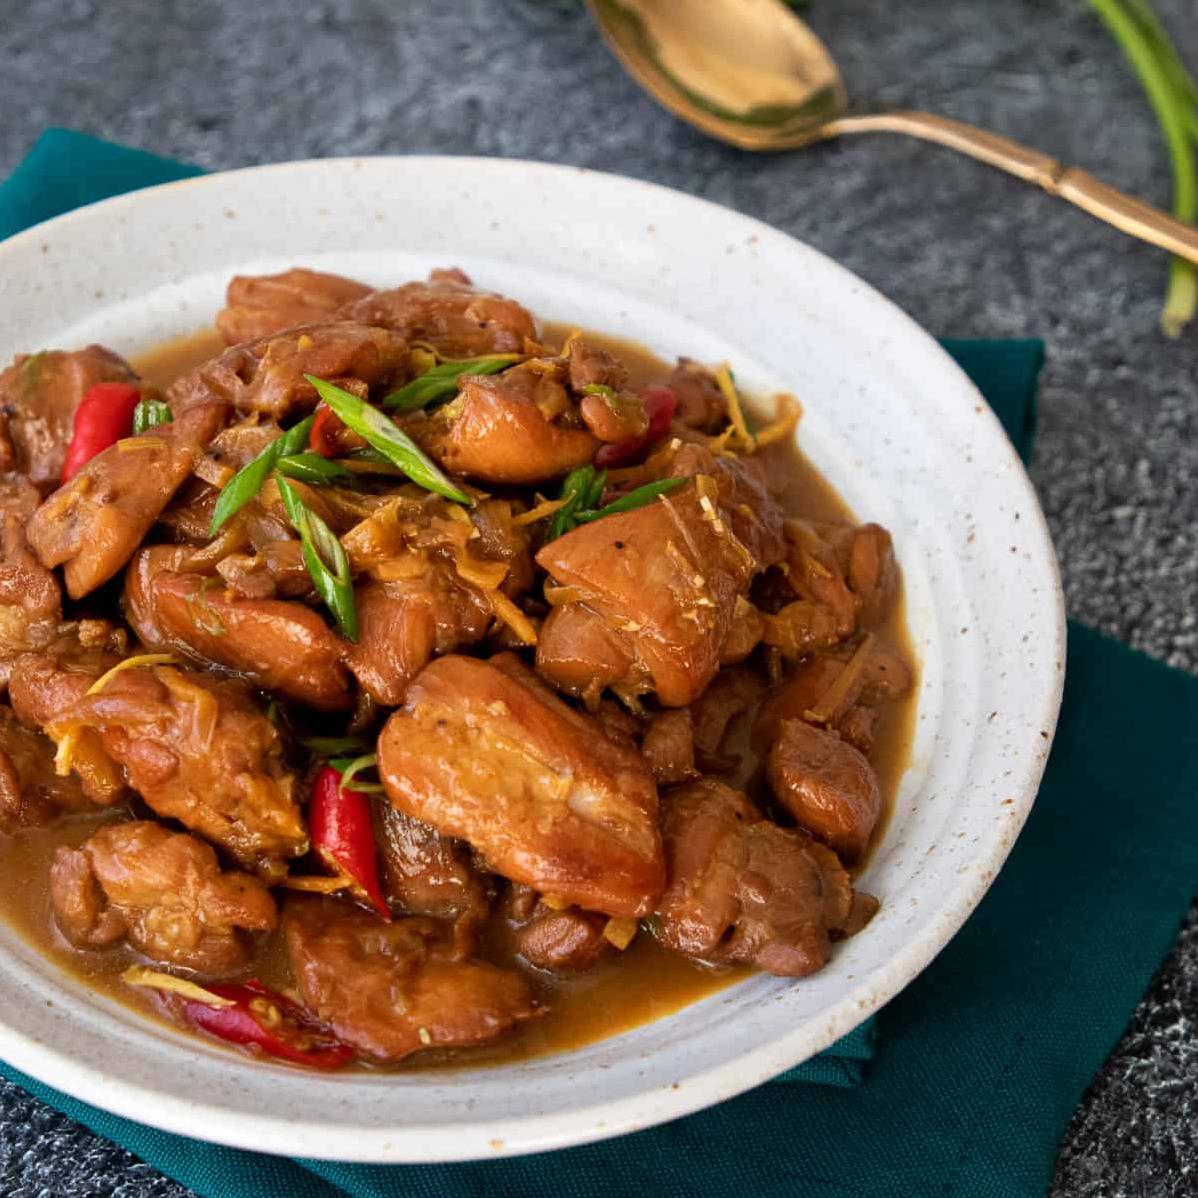  This caramel braised chicken is a must-try for all Vietnamese food lovers.